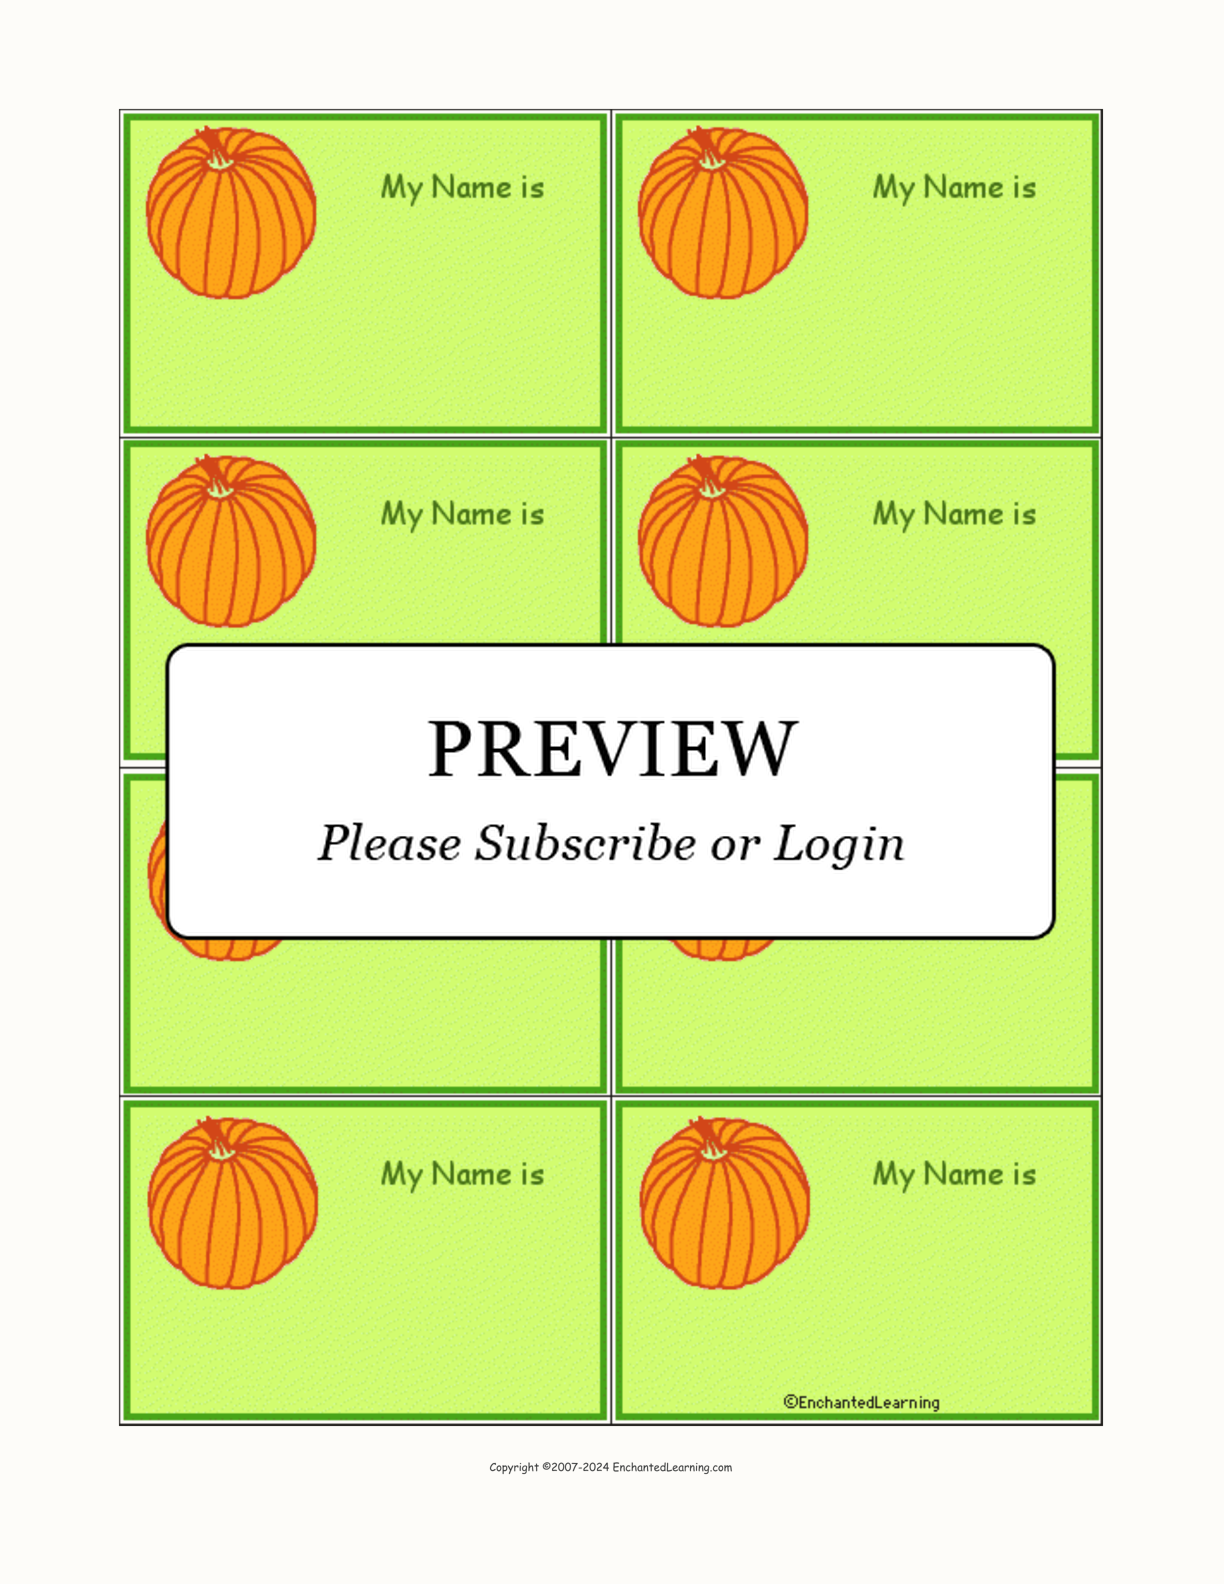 Pumpkin Nametags to Print (in Color) interactive printout page 1